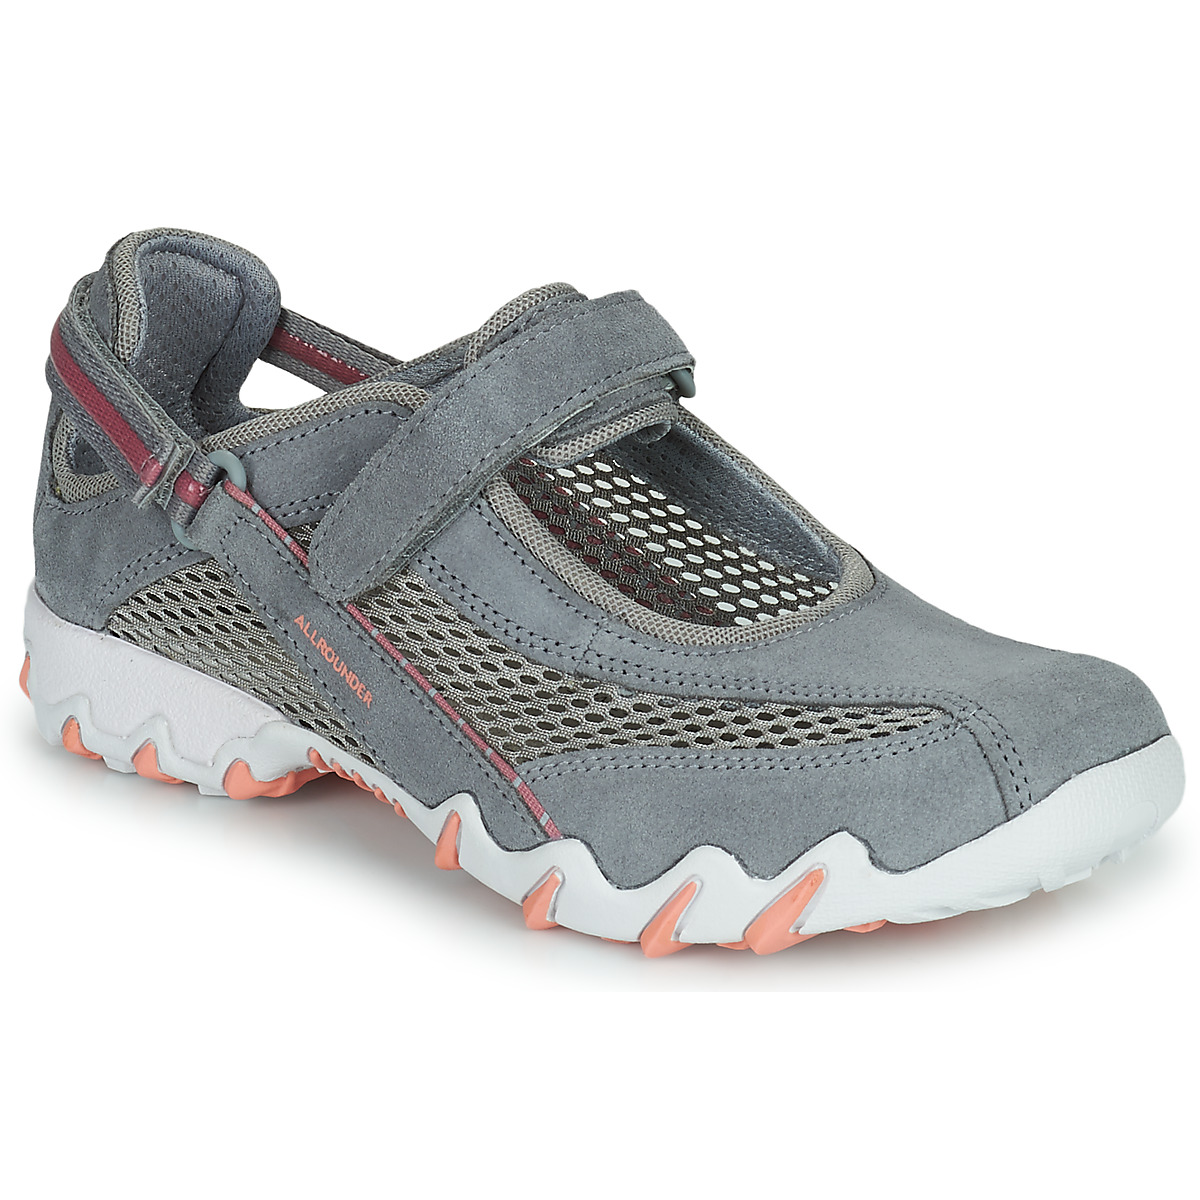 Chaussures Femme Sandales sport Allrounder by Mephisto NIRO 